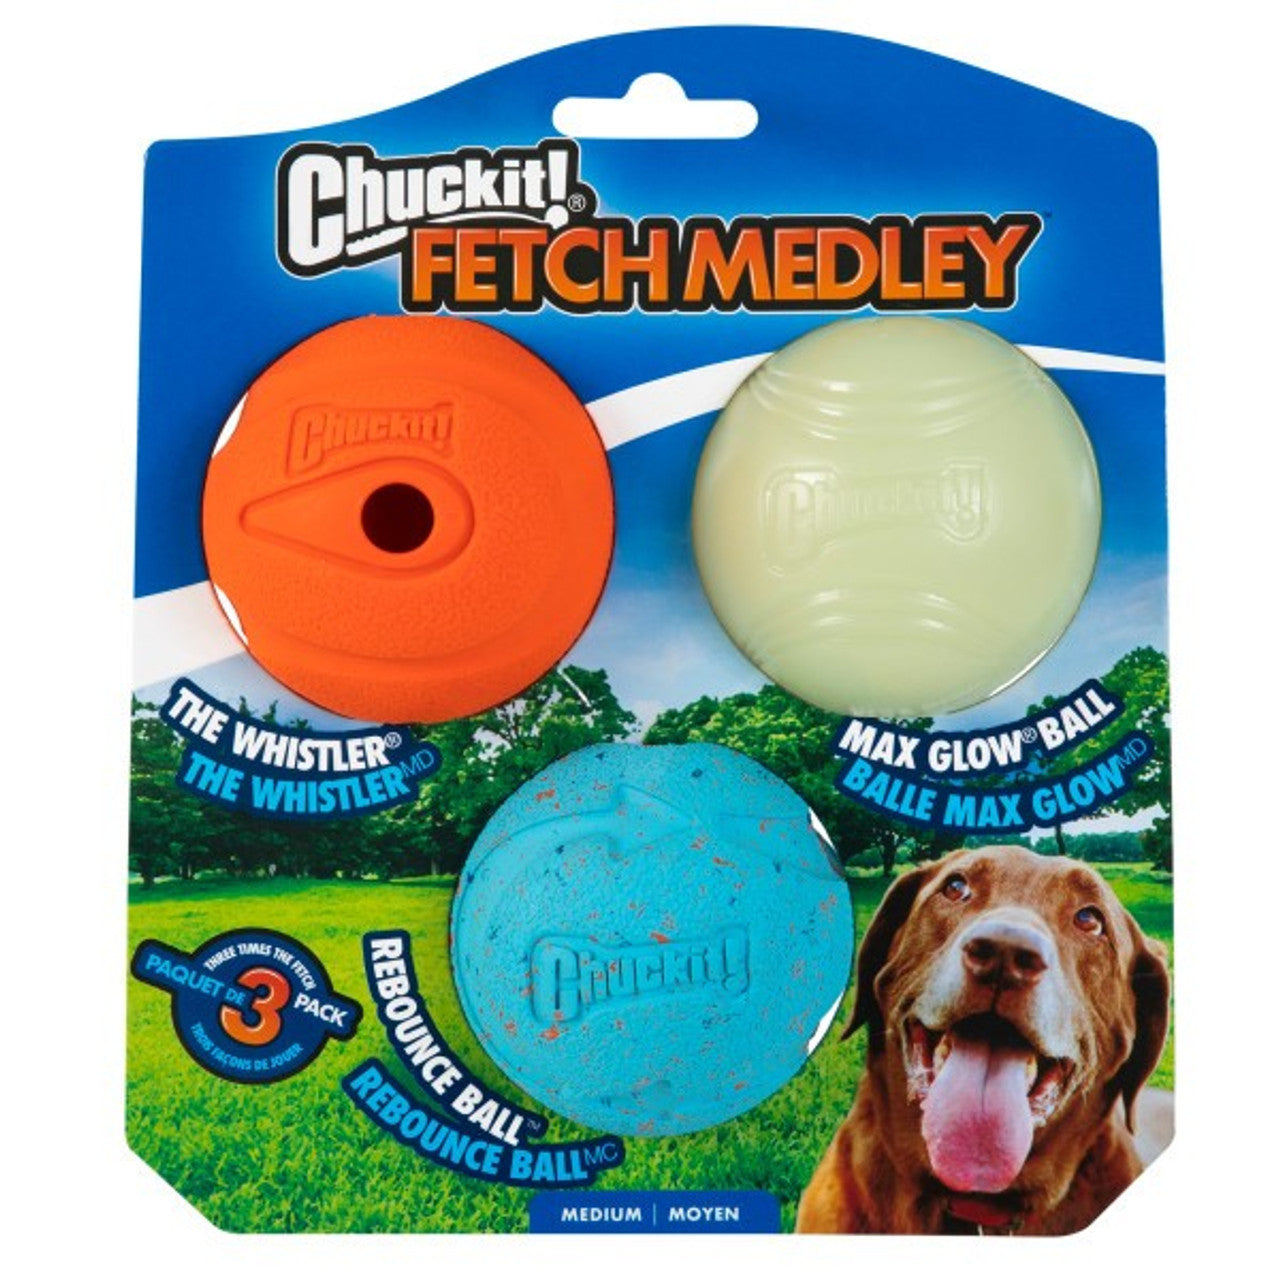 Chuckit! Fetch Medley For Dogs And Puppies